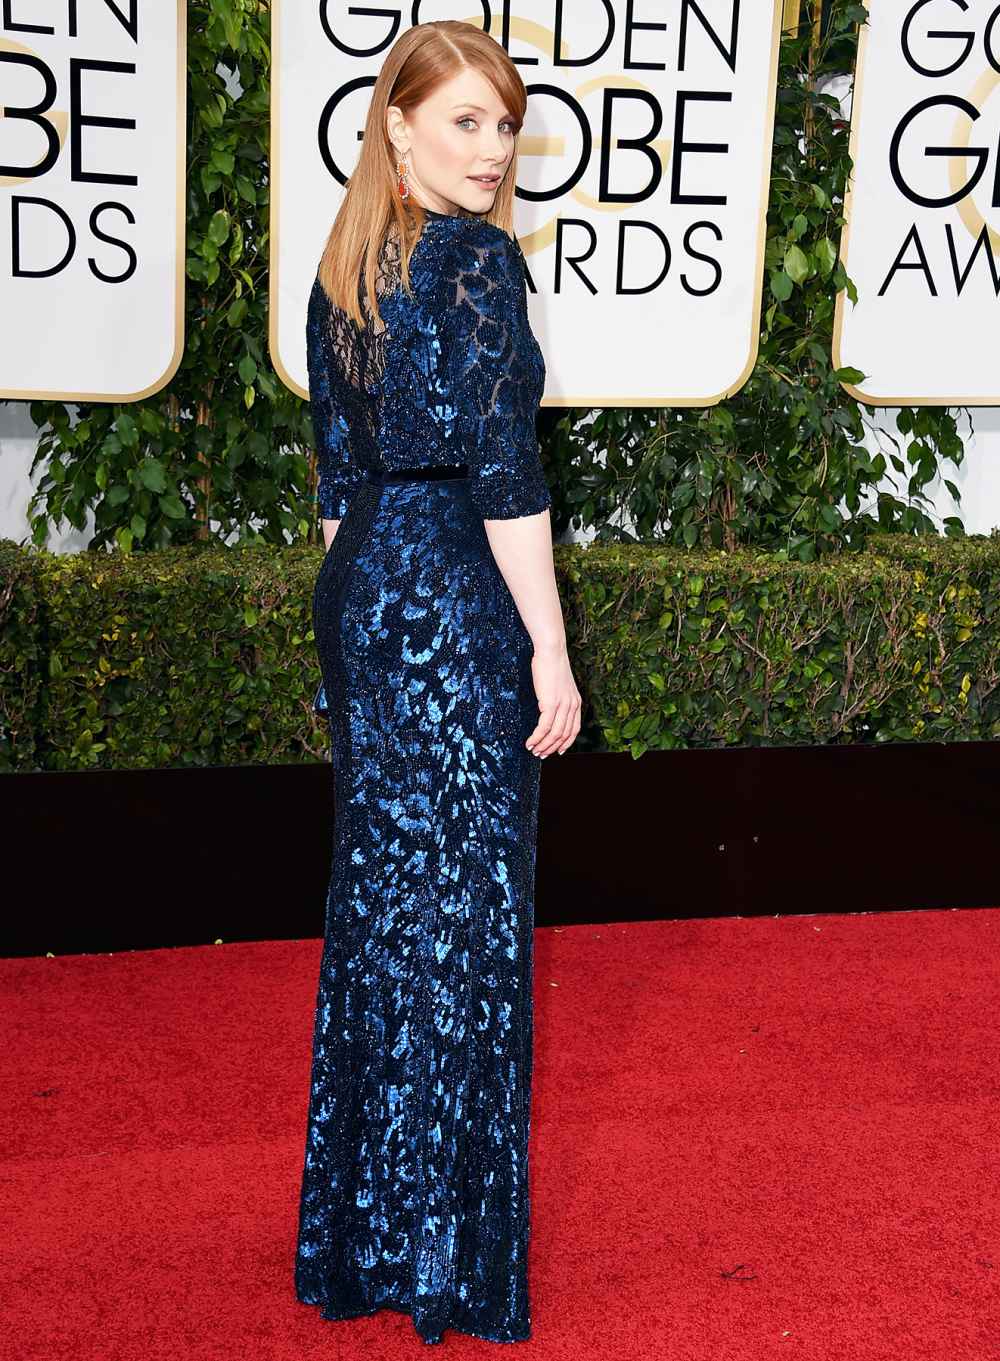 Bryce Dallas Howard at the Golden Globes 2016